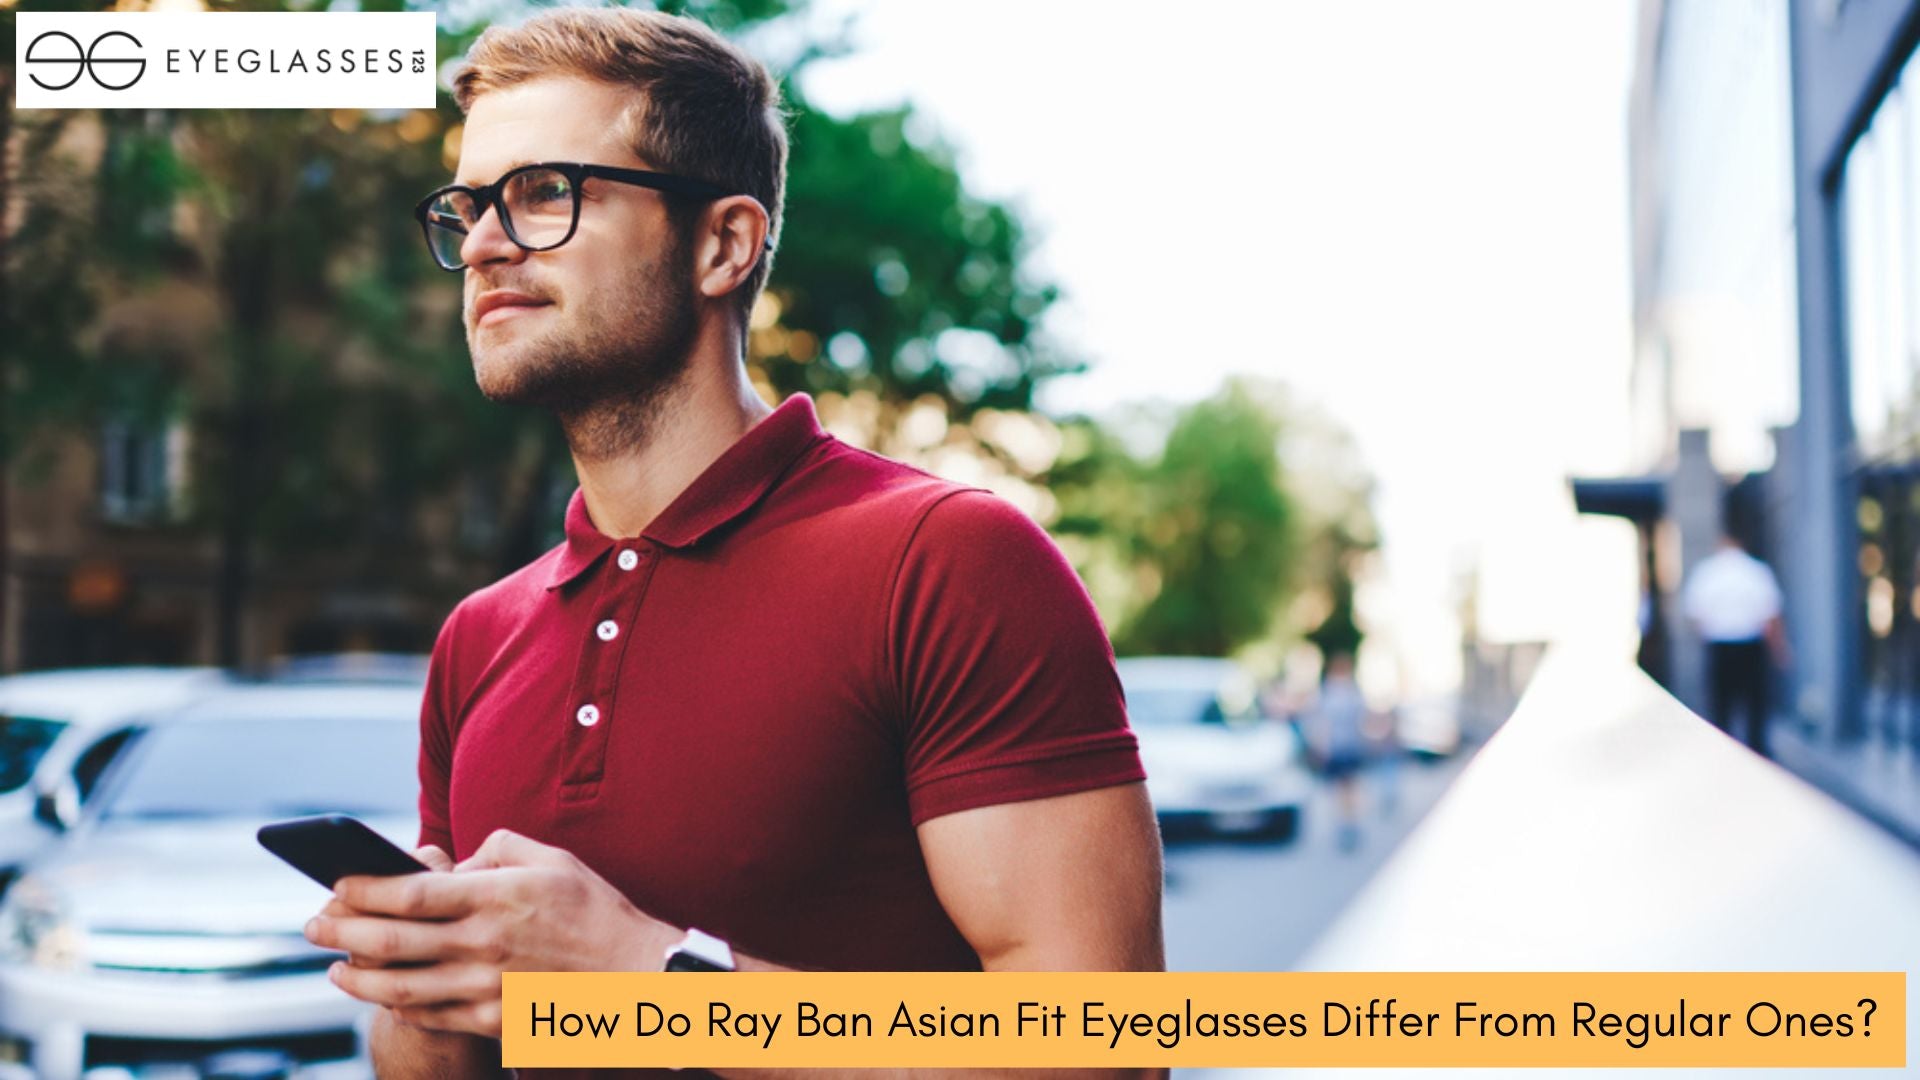 How Do Ray Ban Asian Fit Eyeglasses Differ From Regular Ones?